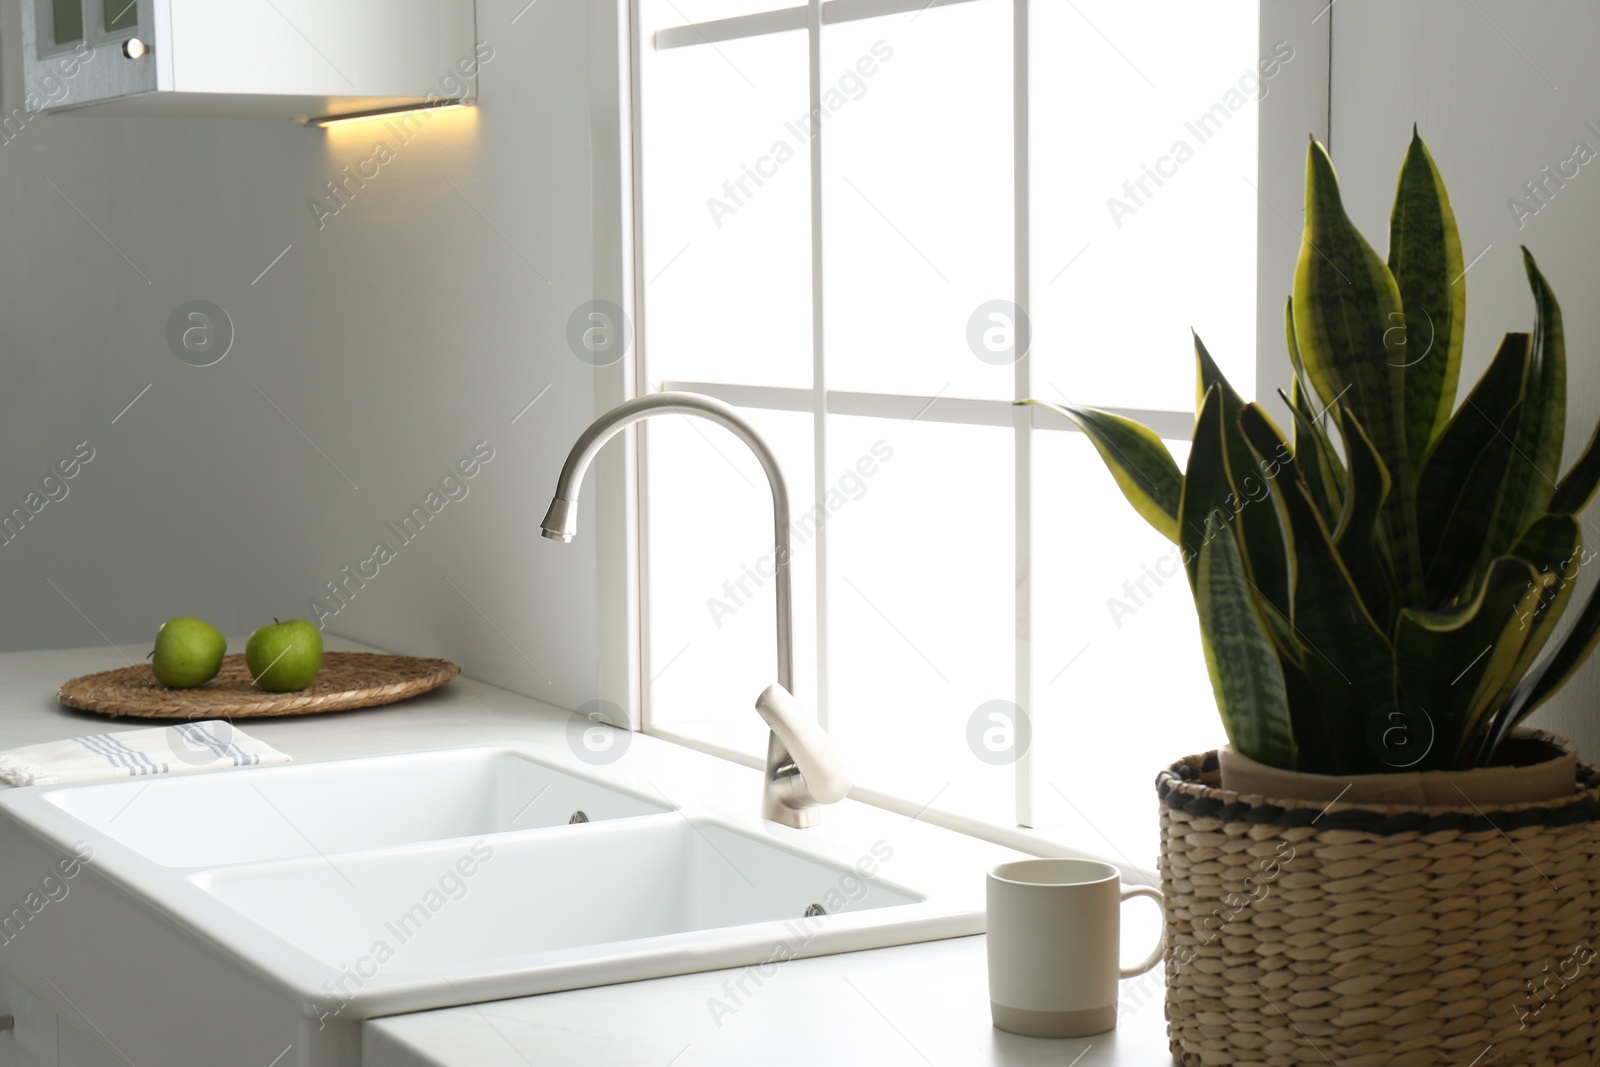 Photo of New ceramic sink and modern tap in stylish kitchen interior